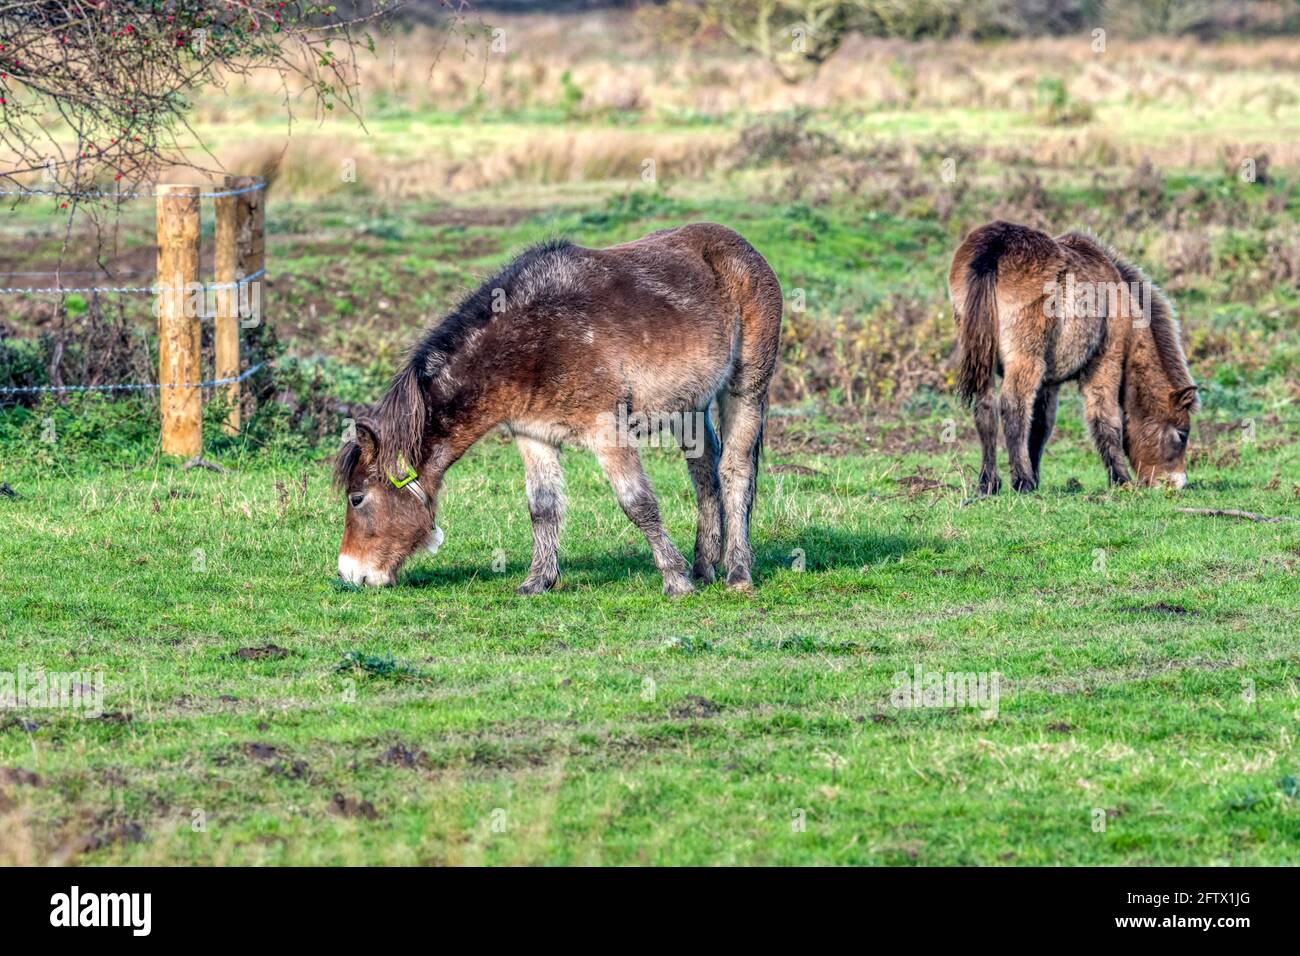 Exmoor ponies introduced to the Ken Hill rewilding project as conservation grazing animals.  Pony on left wearing collar with satellite tracking. Stock Photo